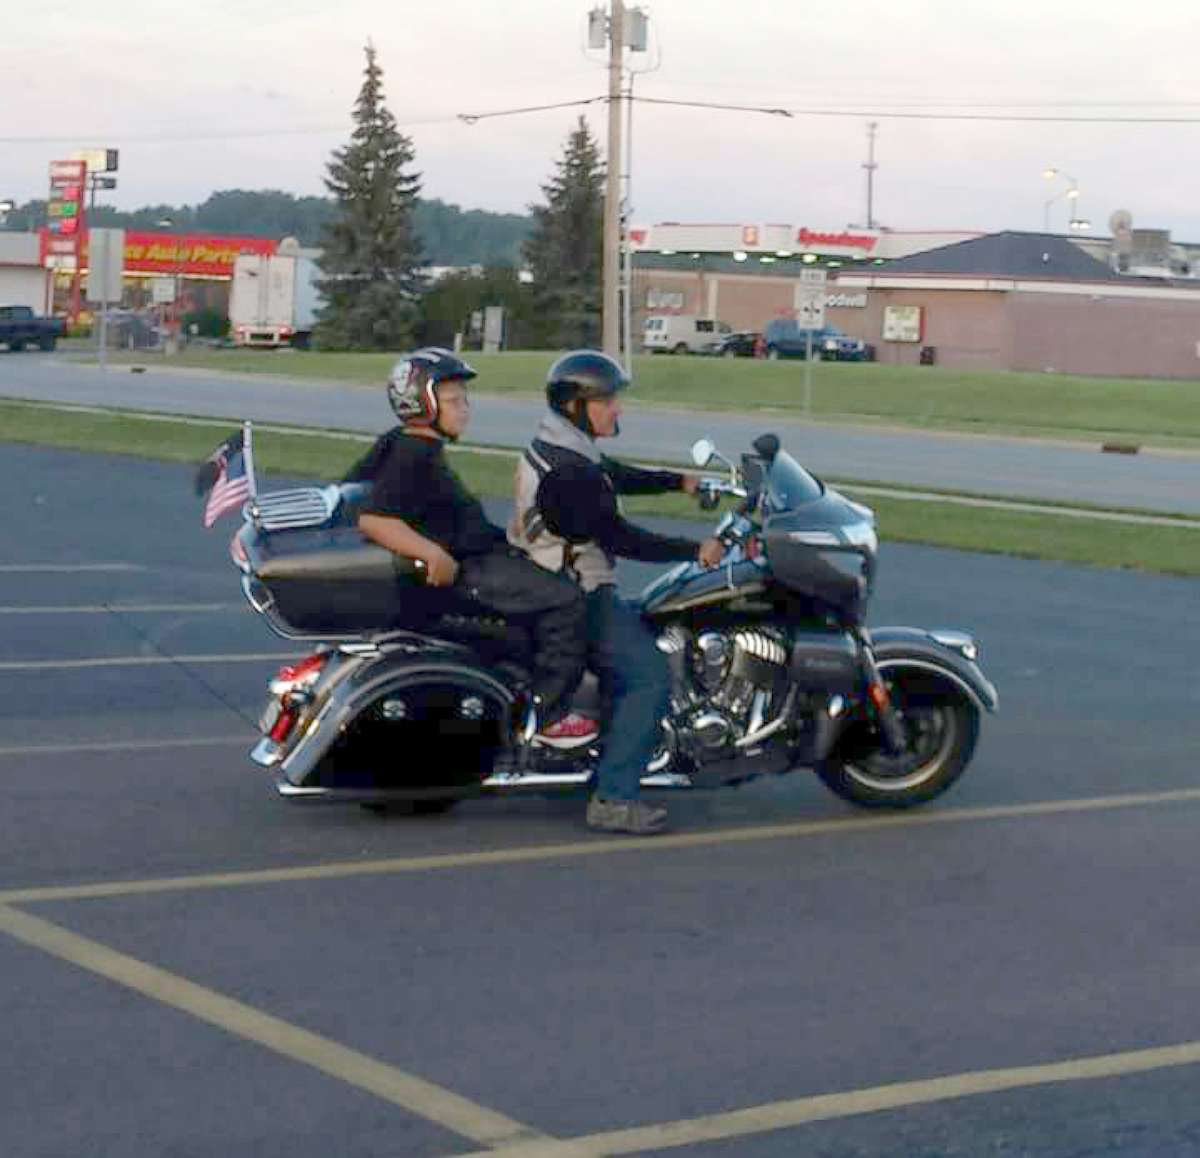 PHOTO: Phil Mick, 11, got a special ride on the back of the motorcycle of Brett Warfield, sales manager of KDZ Motorcycle Sales & Service, on his way to school on Aug. 1 in Indiana.